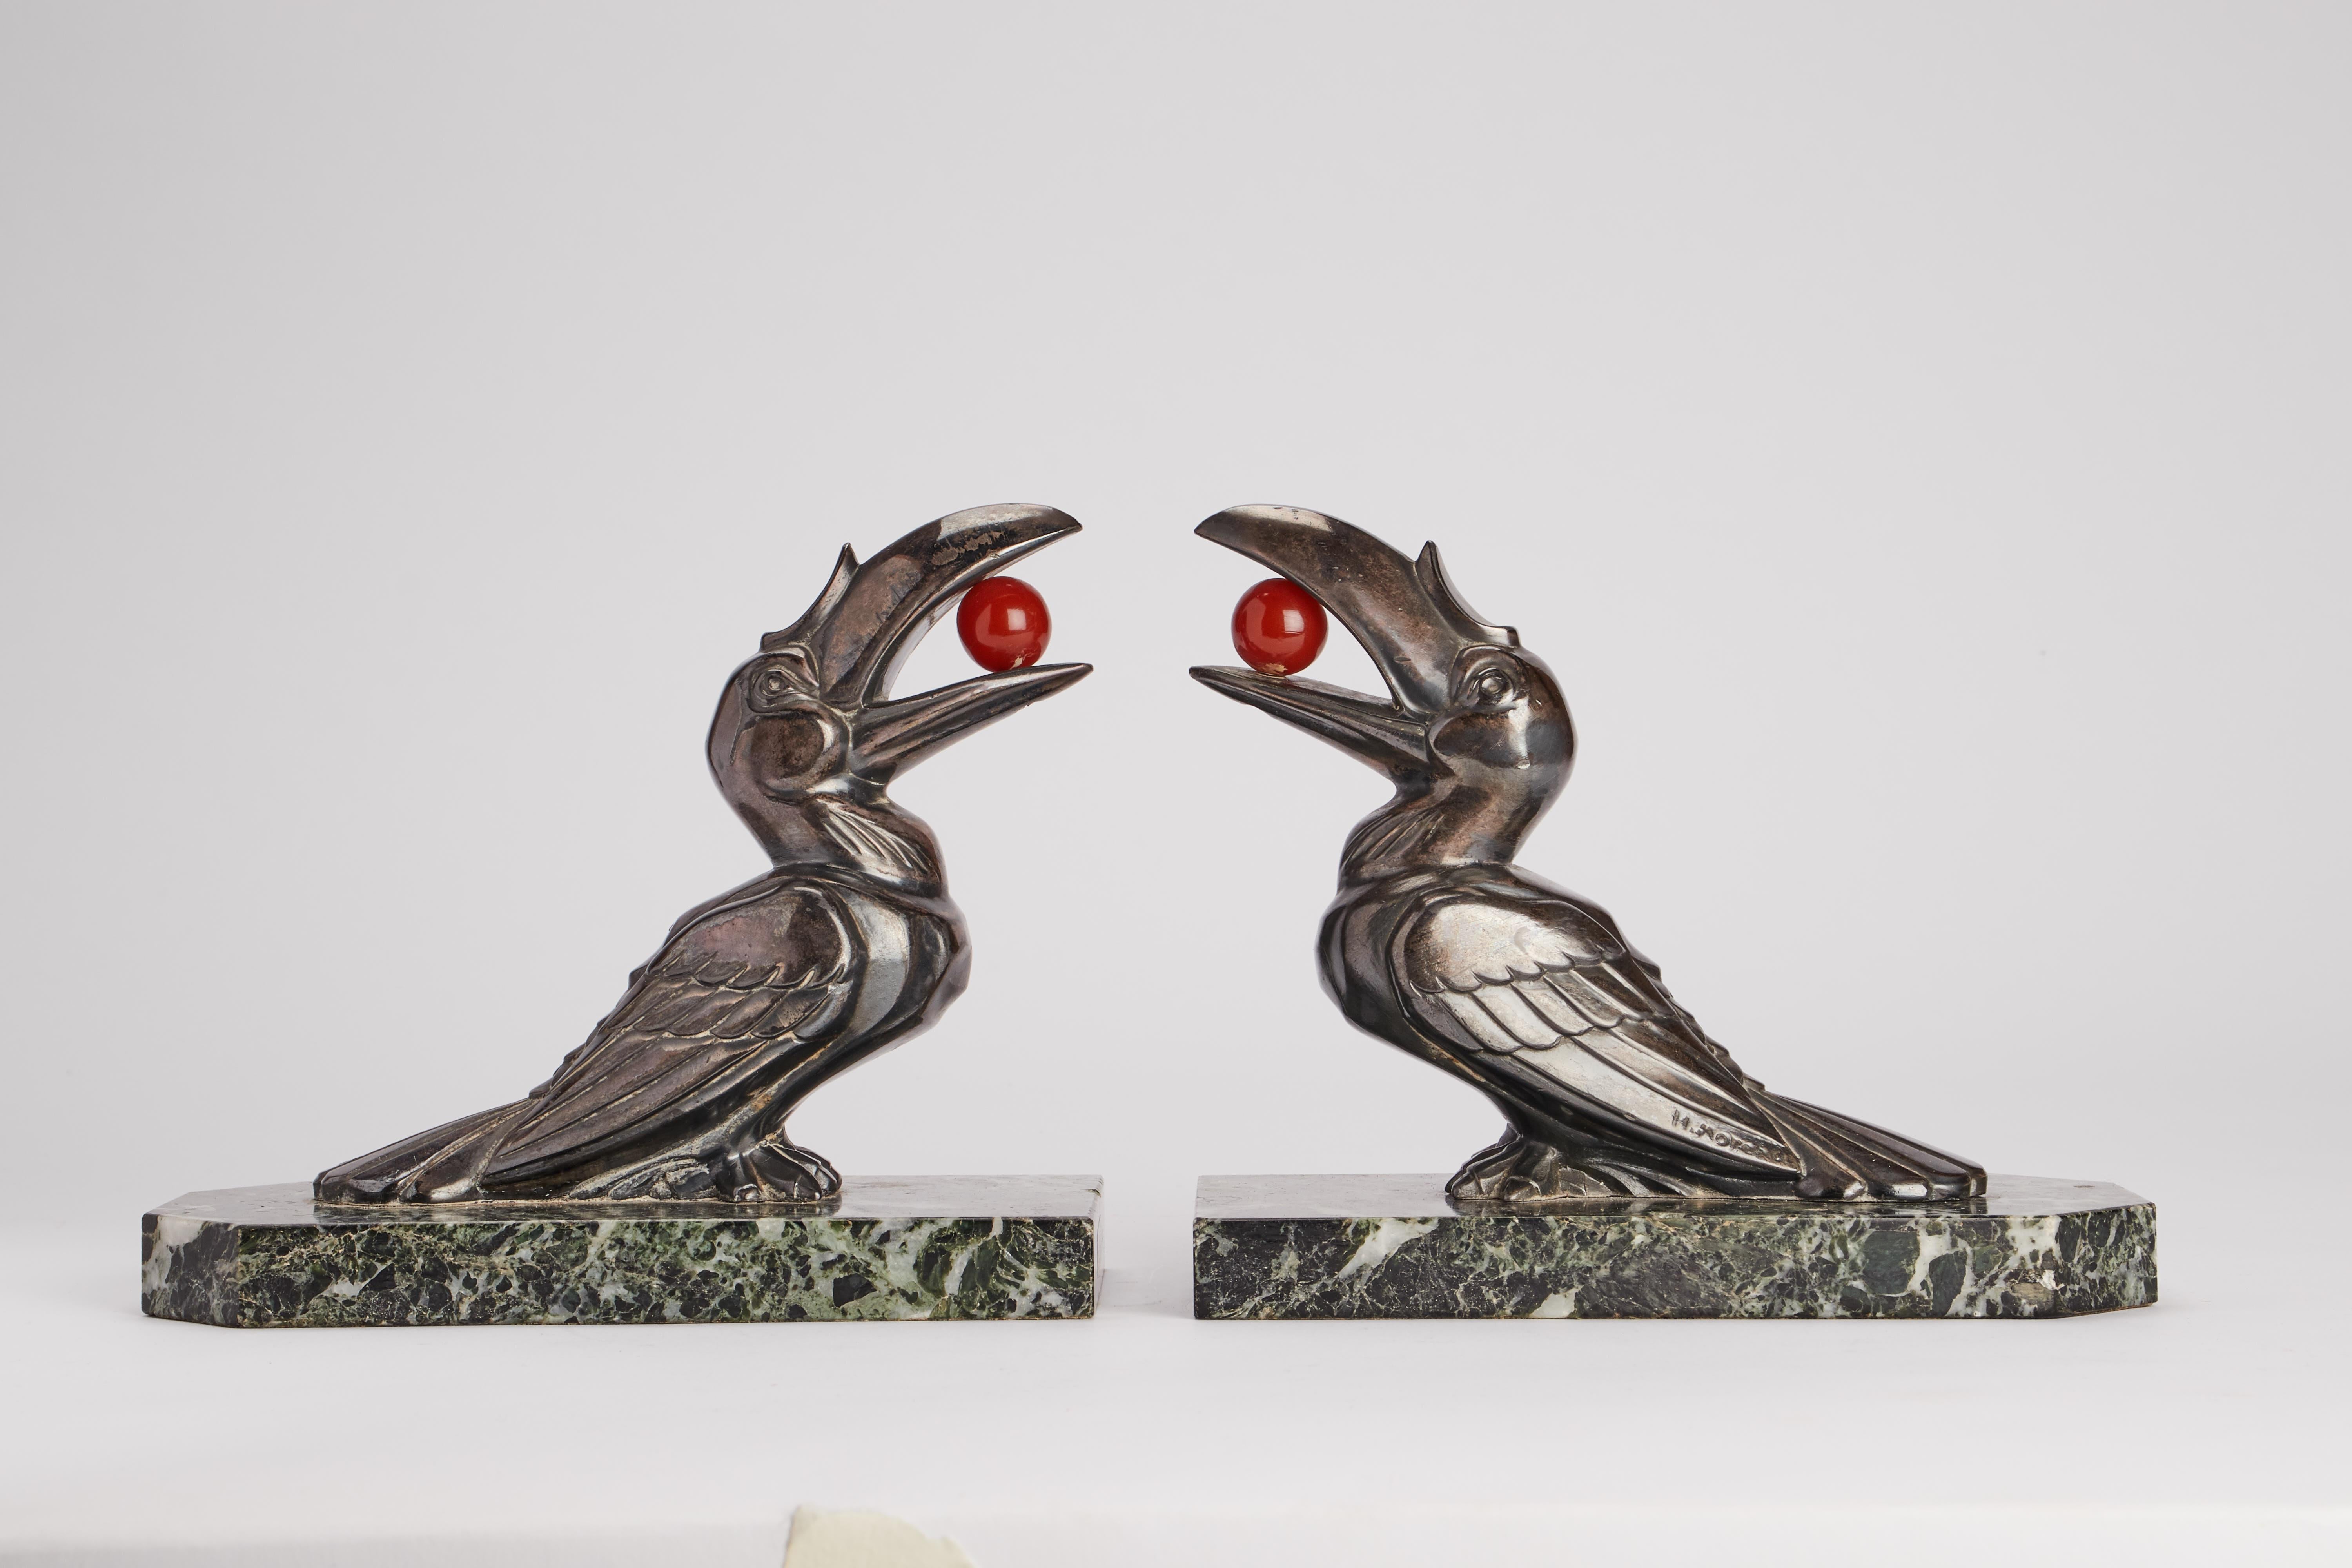 Pair of bookends in veined green marble with orthogonal structure. On the marble base there are two identical metal sculptures, depicting two Toucan birds with an amber ball in their beaks. Art Deco'. Signed H. Moreau. France circa 1925.